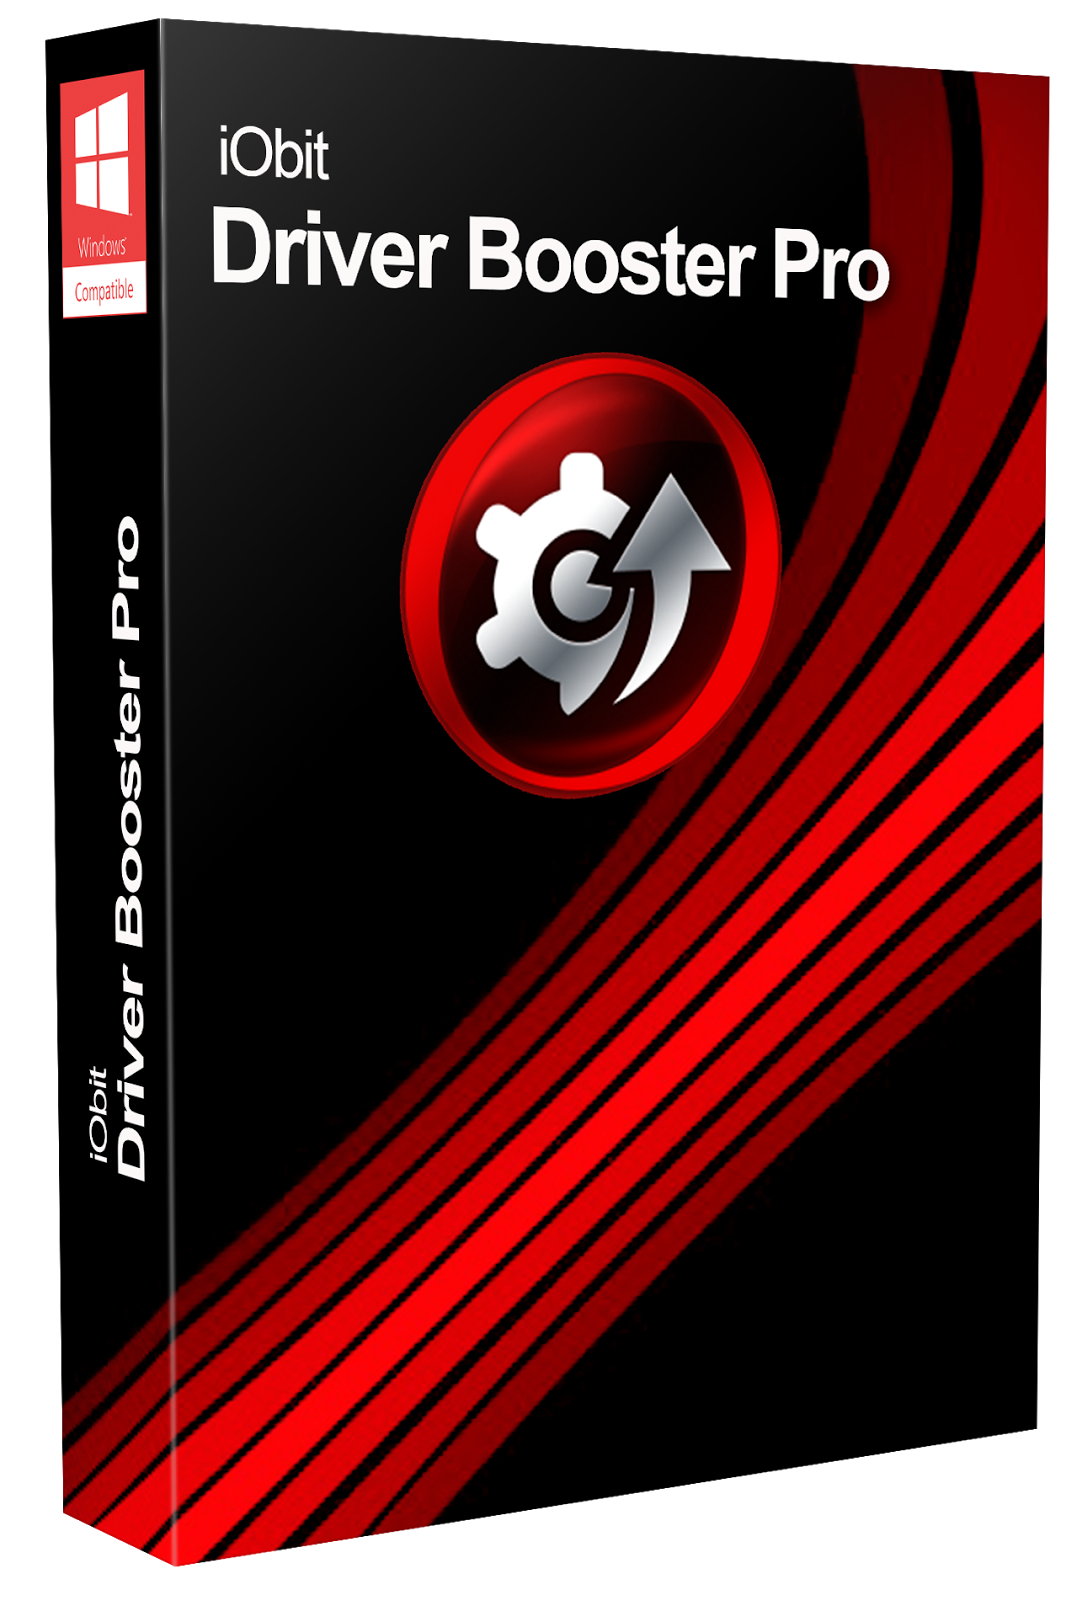 Iobit driver booster pro 11.3 0.43. Driver Booster. IOBIT Driver Booster Pro. Driver Booster Pro 8. Driver Booster Pro 9.